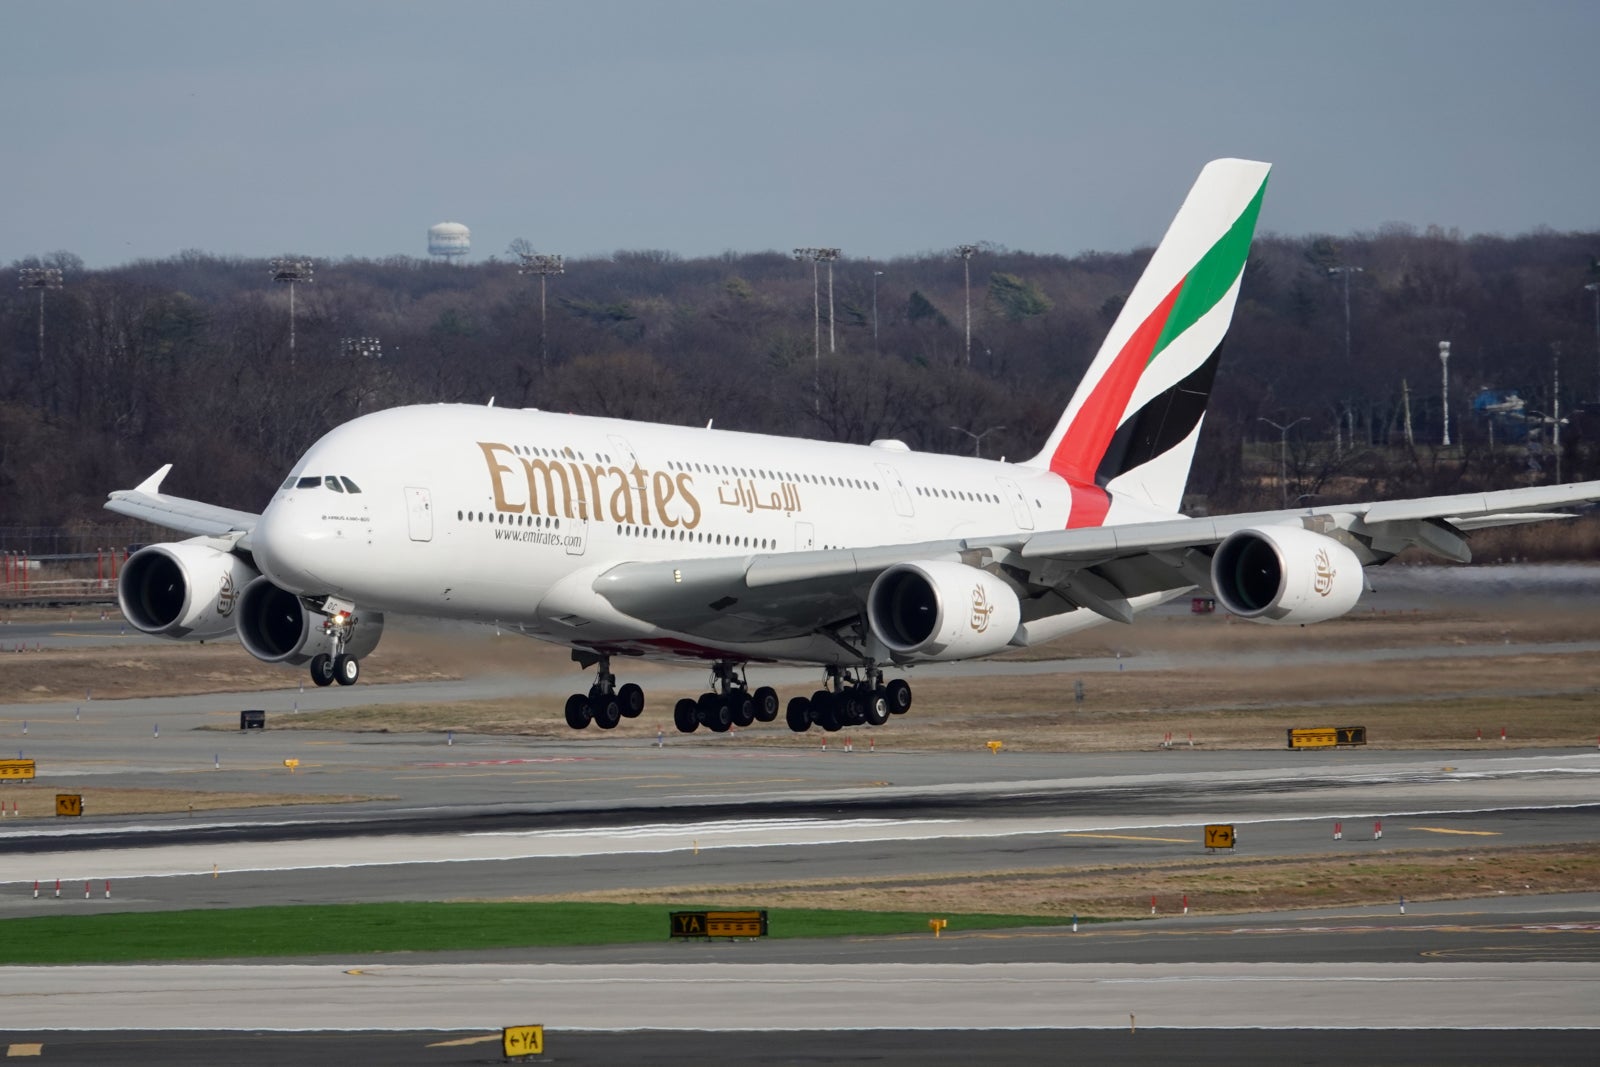 Another devaluation: Emirates raises the cost of US-to-Europe 5th-freedom awards